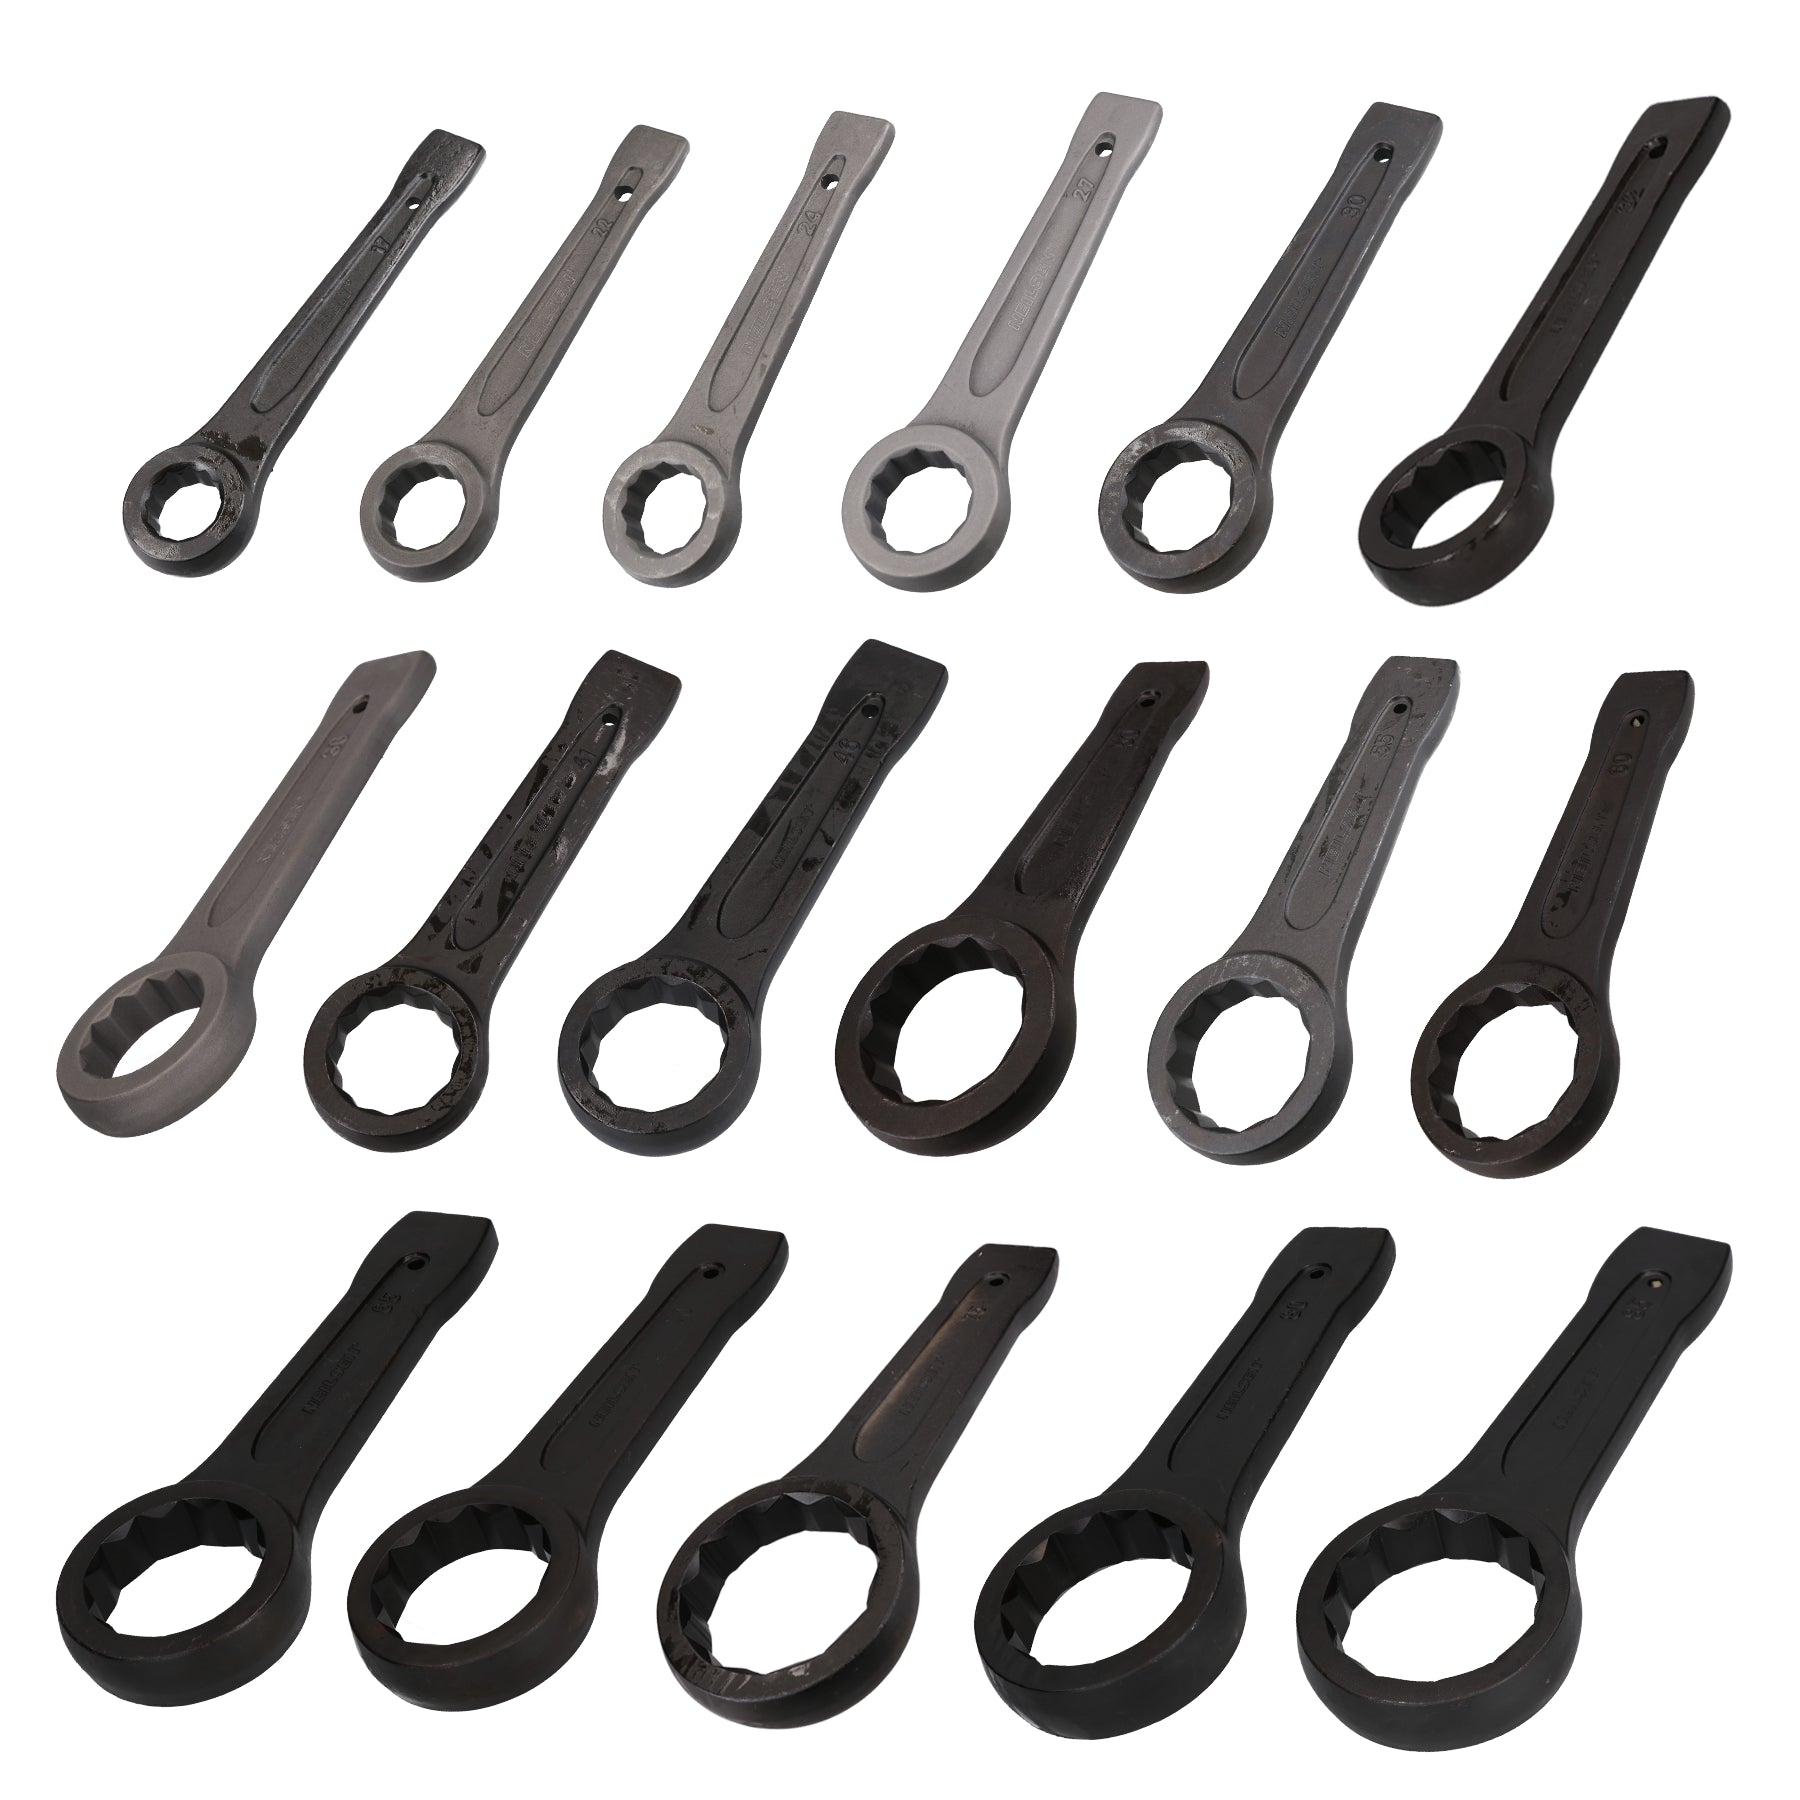 17pc Metric Slogging Box End Striking Spanners Bi-Hex Wrenches 17 - 85mm